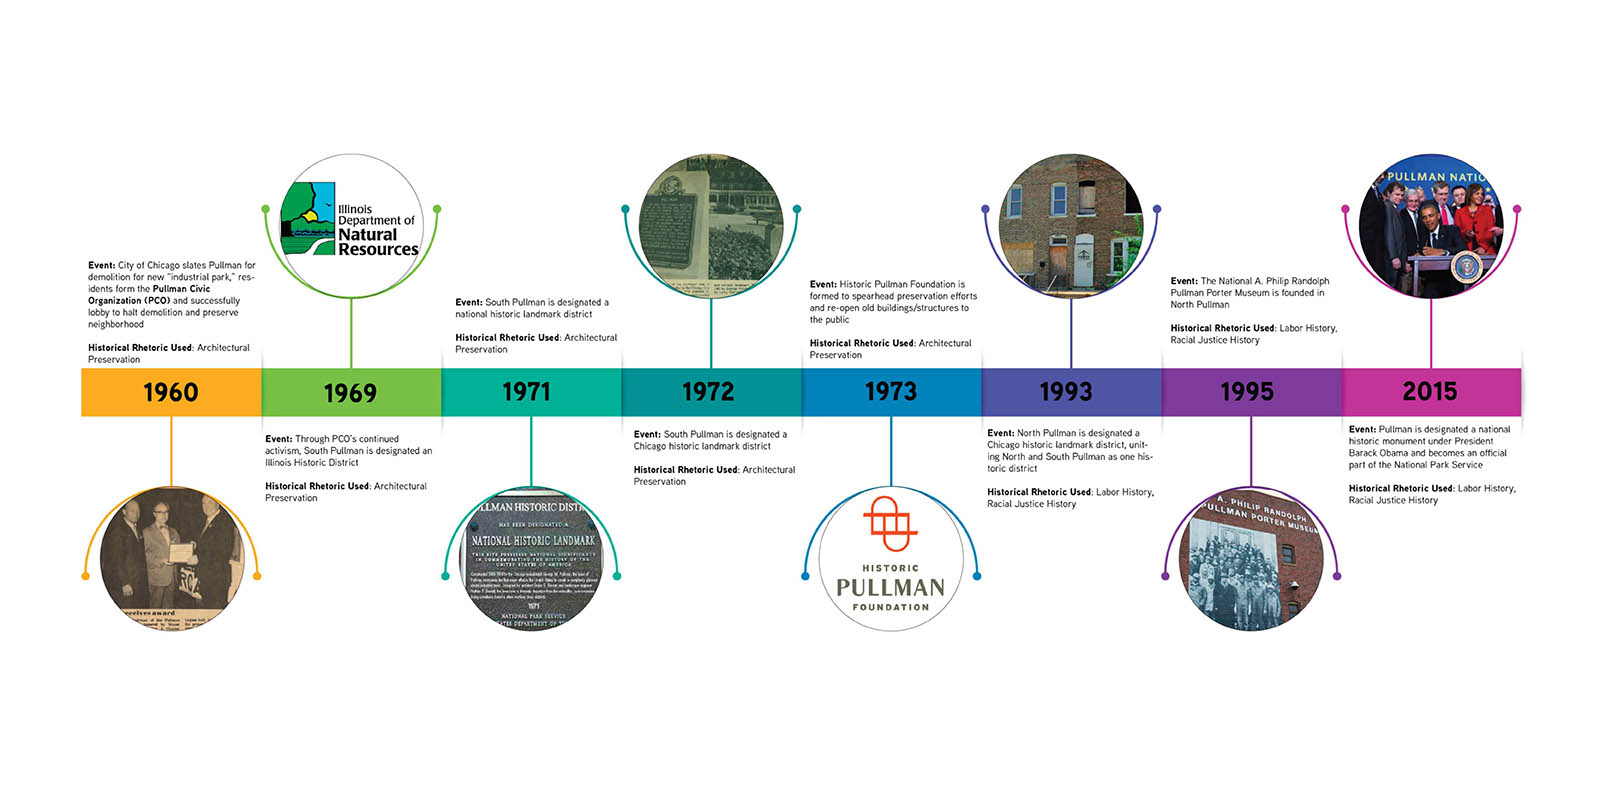 Timeline of historic activism and institutionalization events in Pullman since 1960